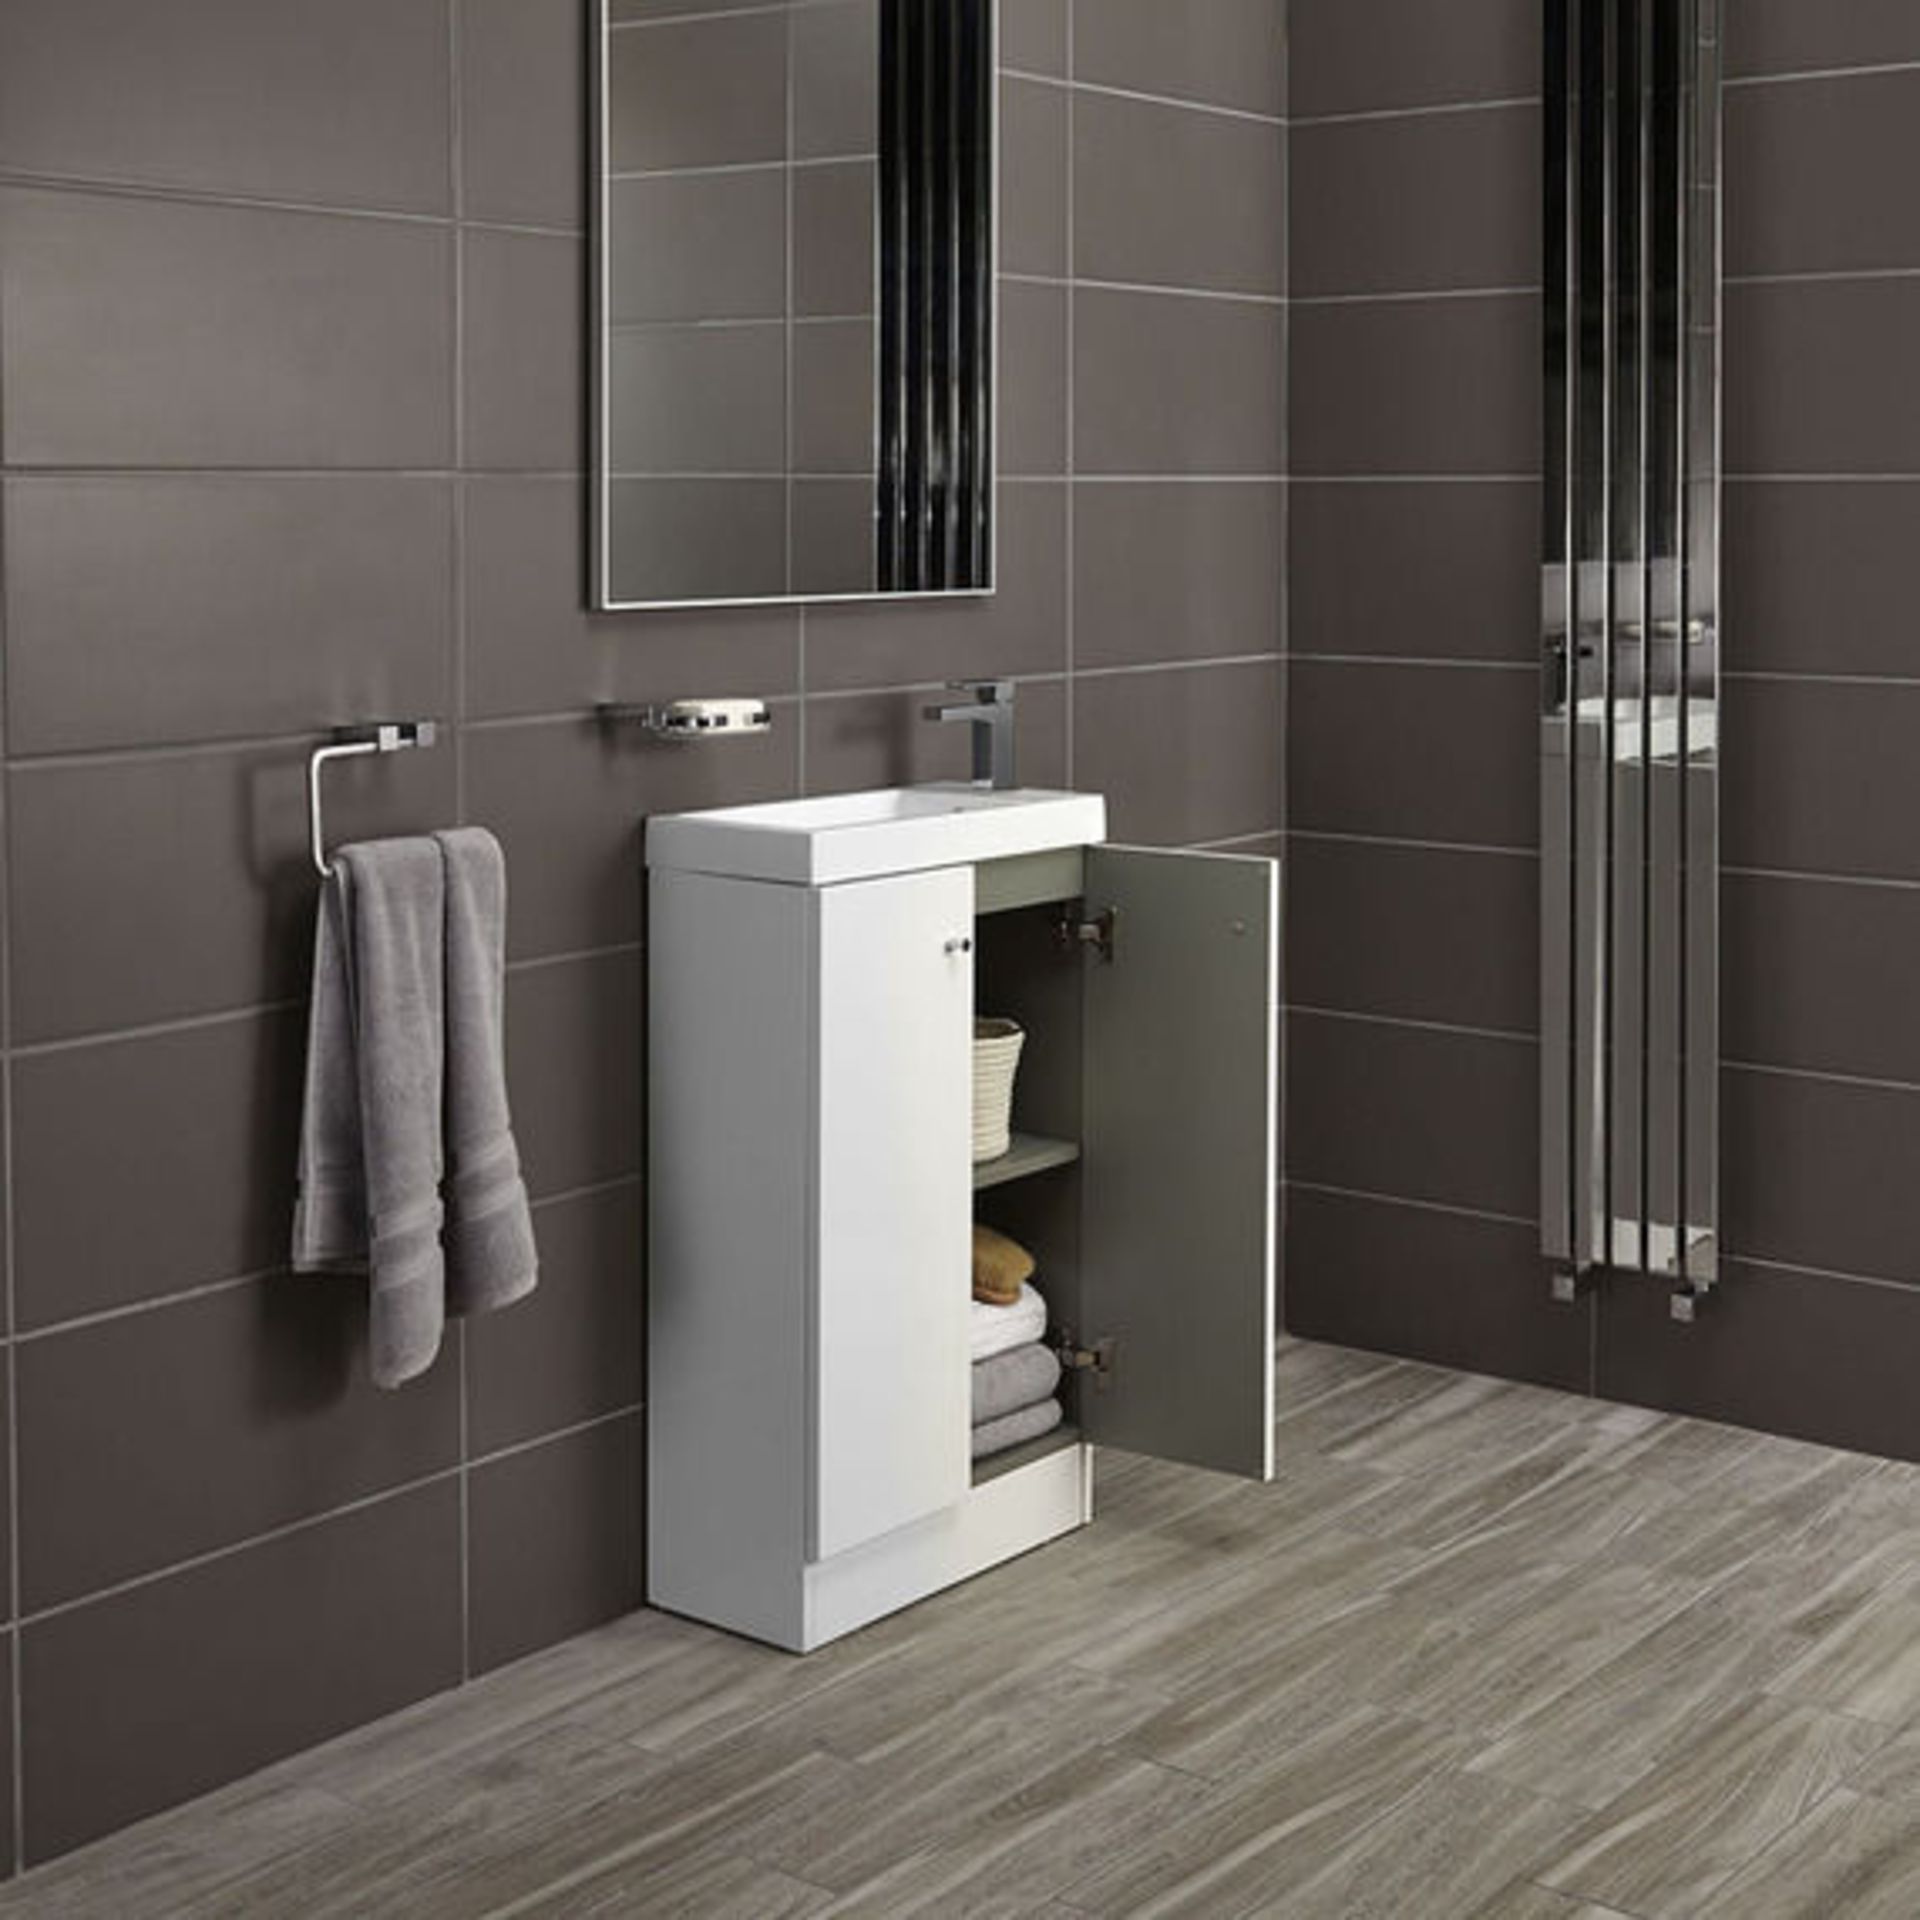 10 x Alpine Duo 495 Floor Standing Vanity Unit - Gloss White - Brand New Boxed Stock - Dimensions: - Image 5 of 5